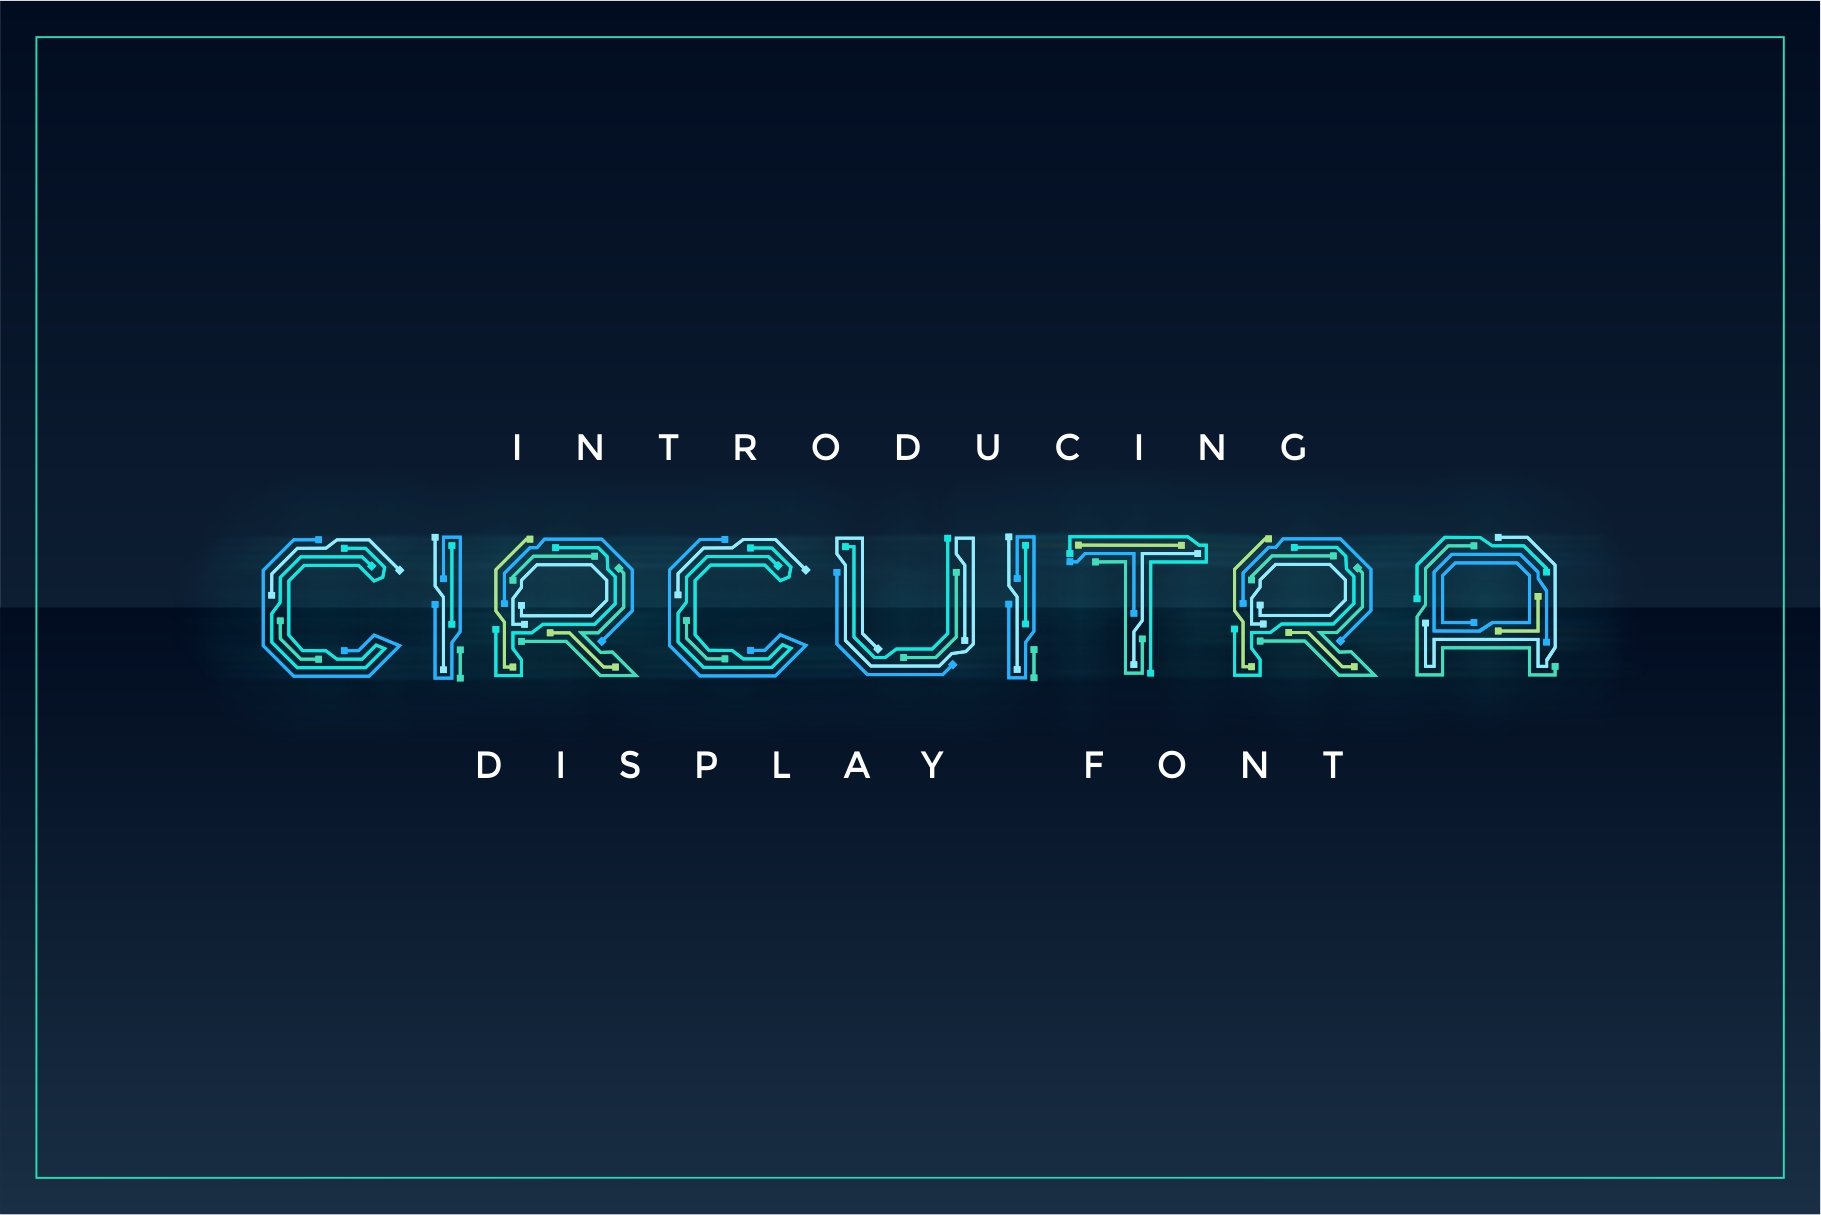 Circuitra Color Font cover image.